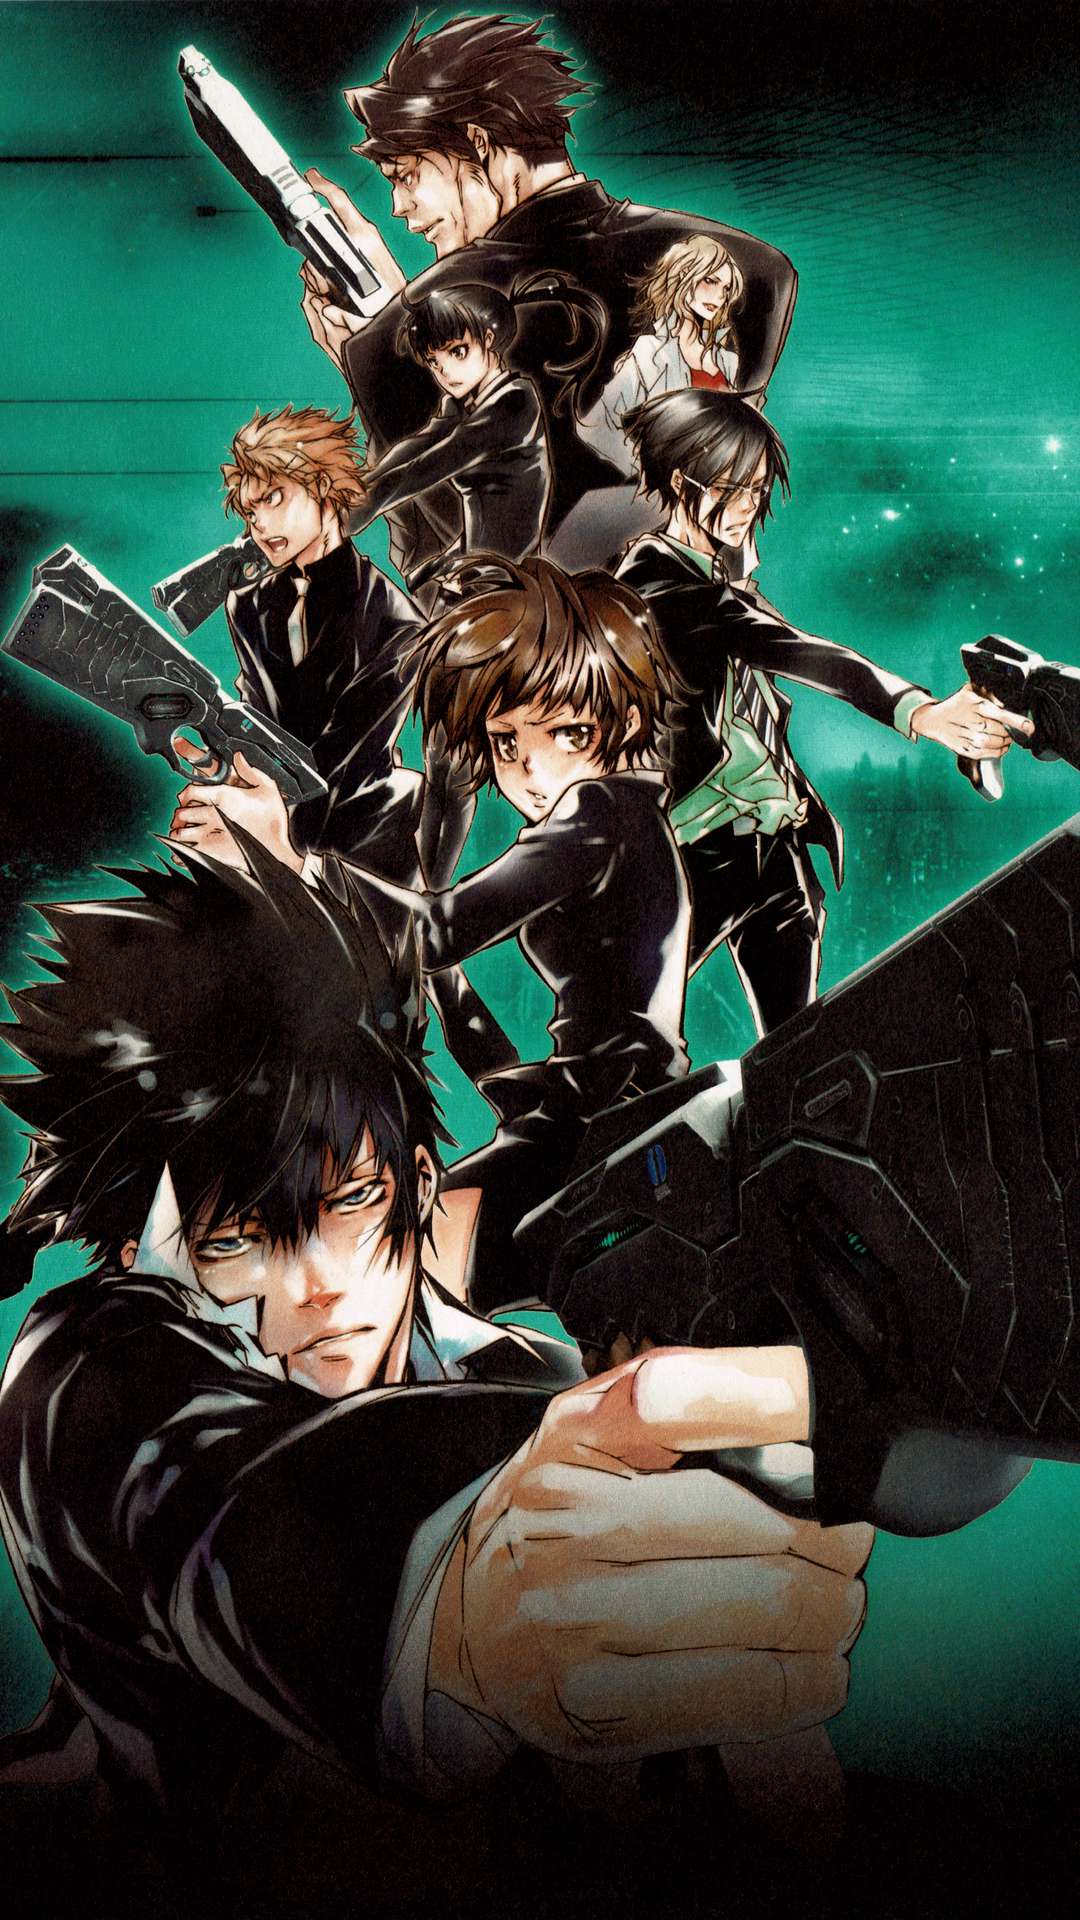 1920x1080 / 1920x1080 High Resolution Wallpaper = psycho pass JPG 280 kB -  Coolwallpapers.me!